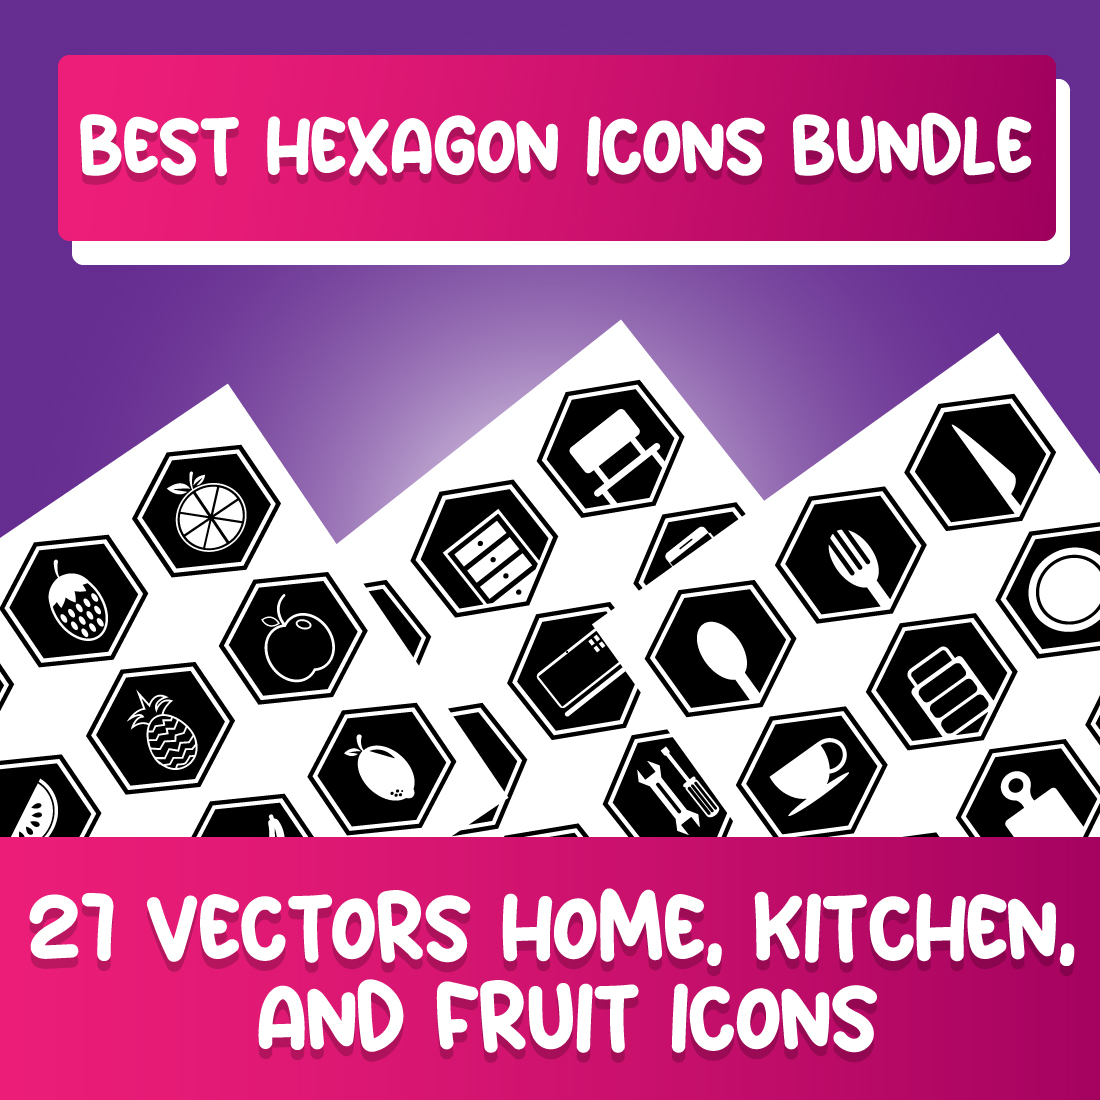 27 Vectors Home, Kitchen, and Fruit Hexagon Icons - Only $9 facebook image.